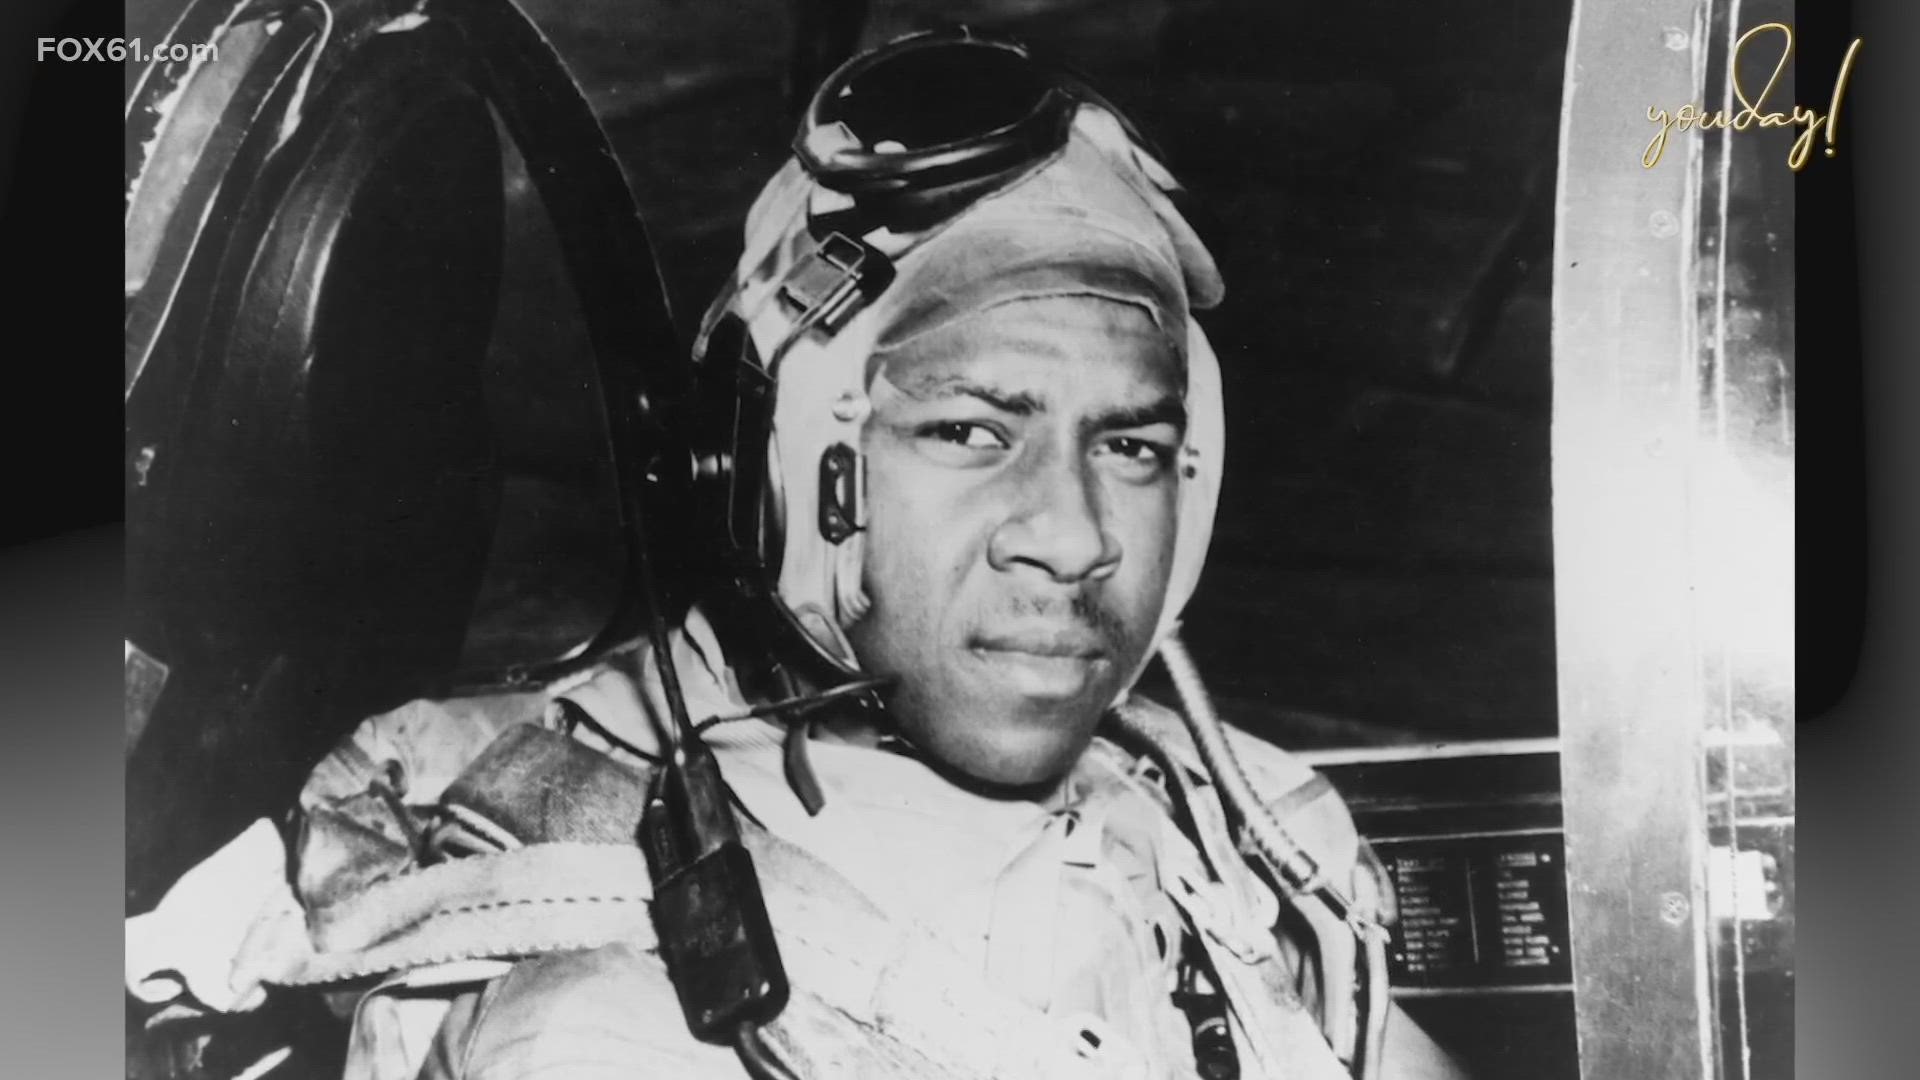 Jesse LeRoy Brown was the first African-American US Navy aviator. We can accomplish great things if we believe in ourselves, no matter what the haters say.